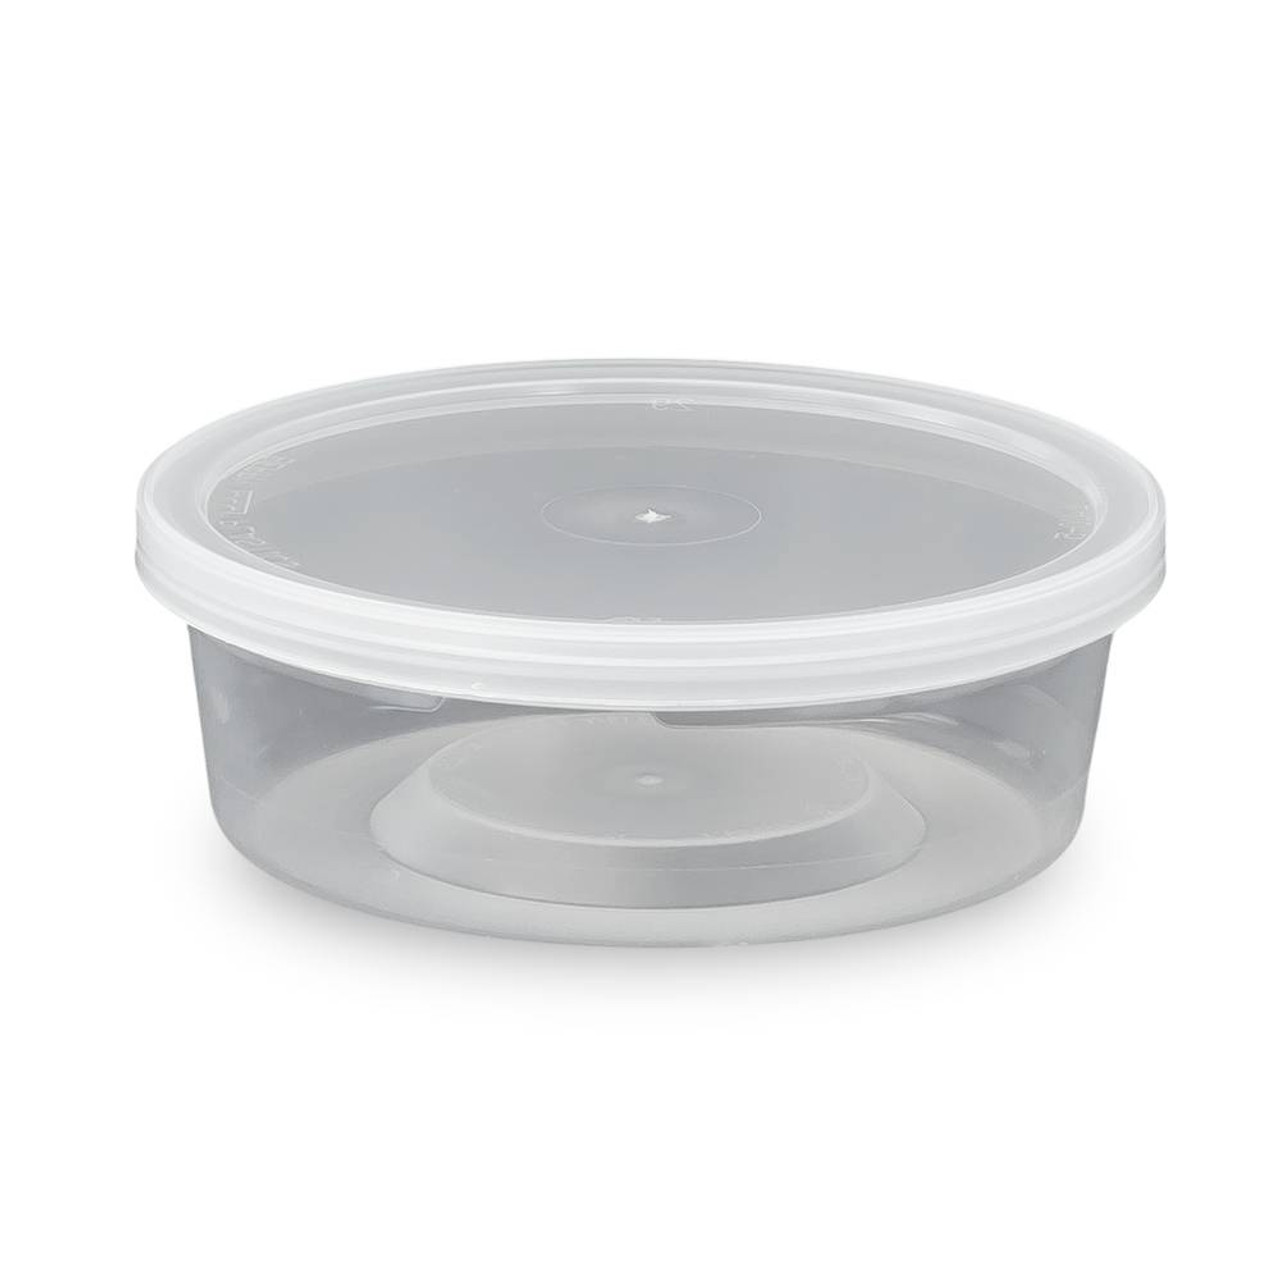 8 oz. BPA Free Food Grade Round Container with Lid (T41008CP) - starting  quantity 50 count - FREE SHIPPING